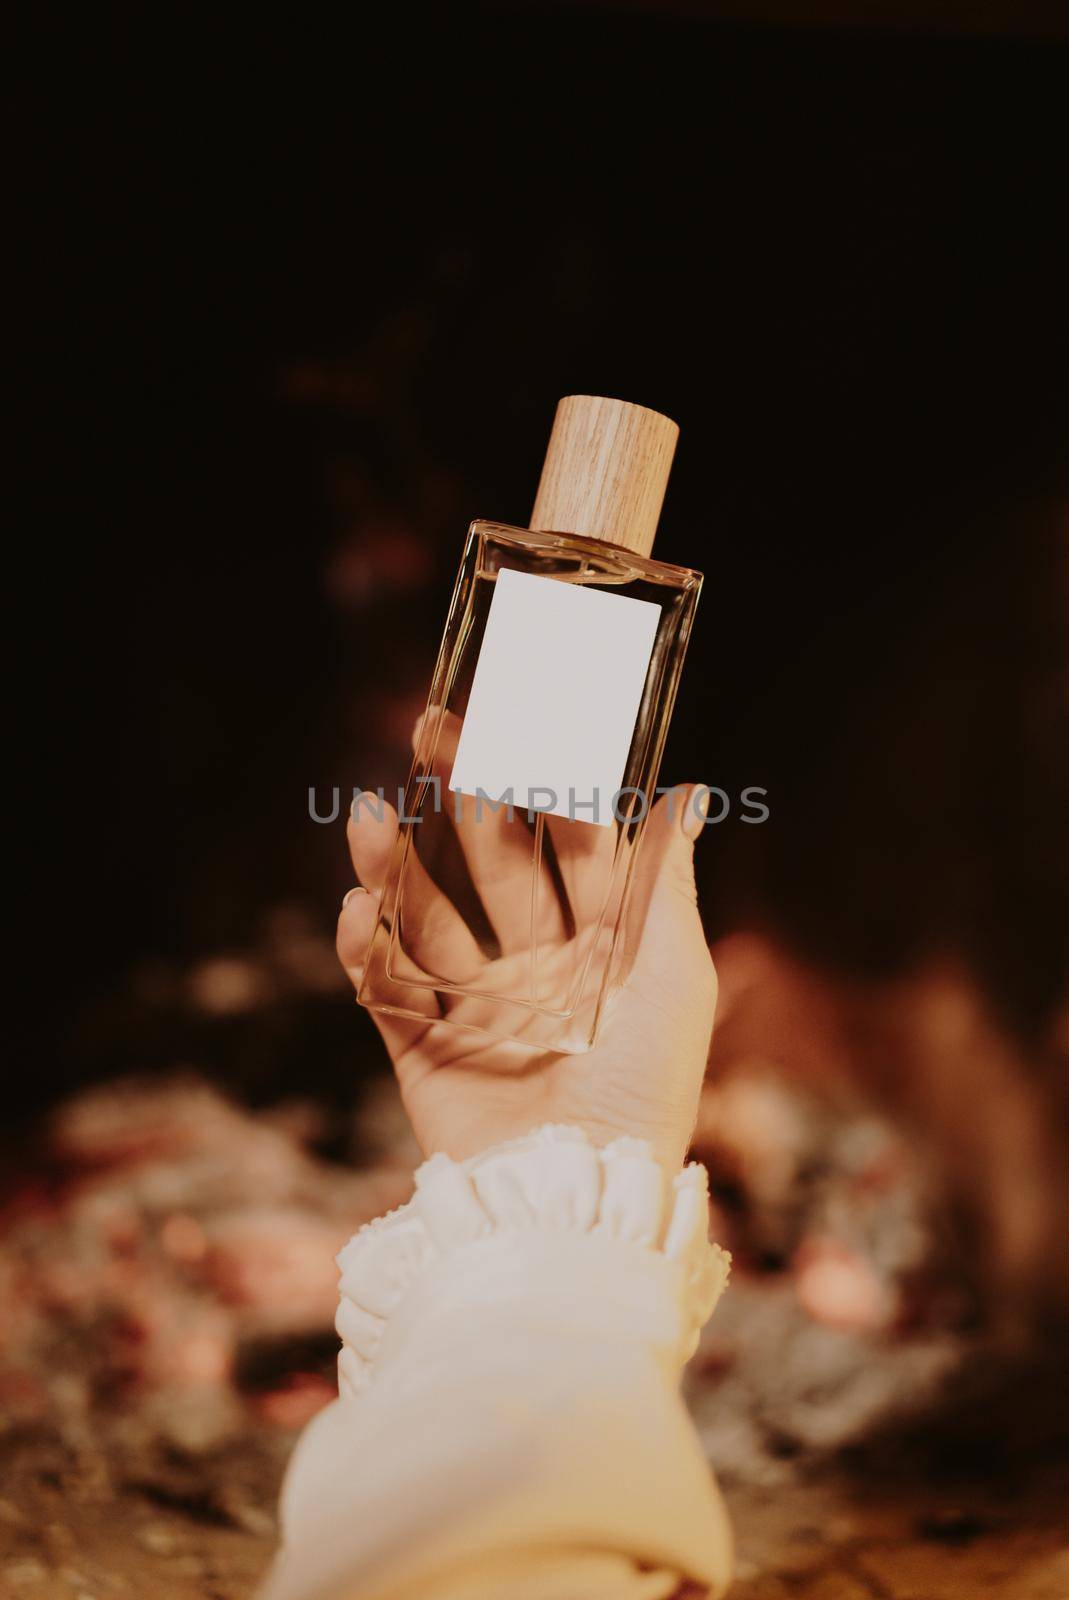 Beautiful minimalist parfume bottle in female hands on fireplace flame background. Fragrance, essence concept. High quality photo